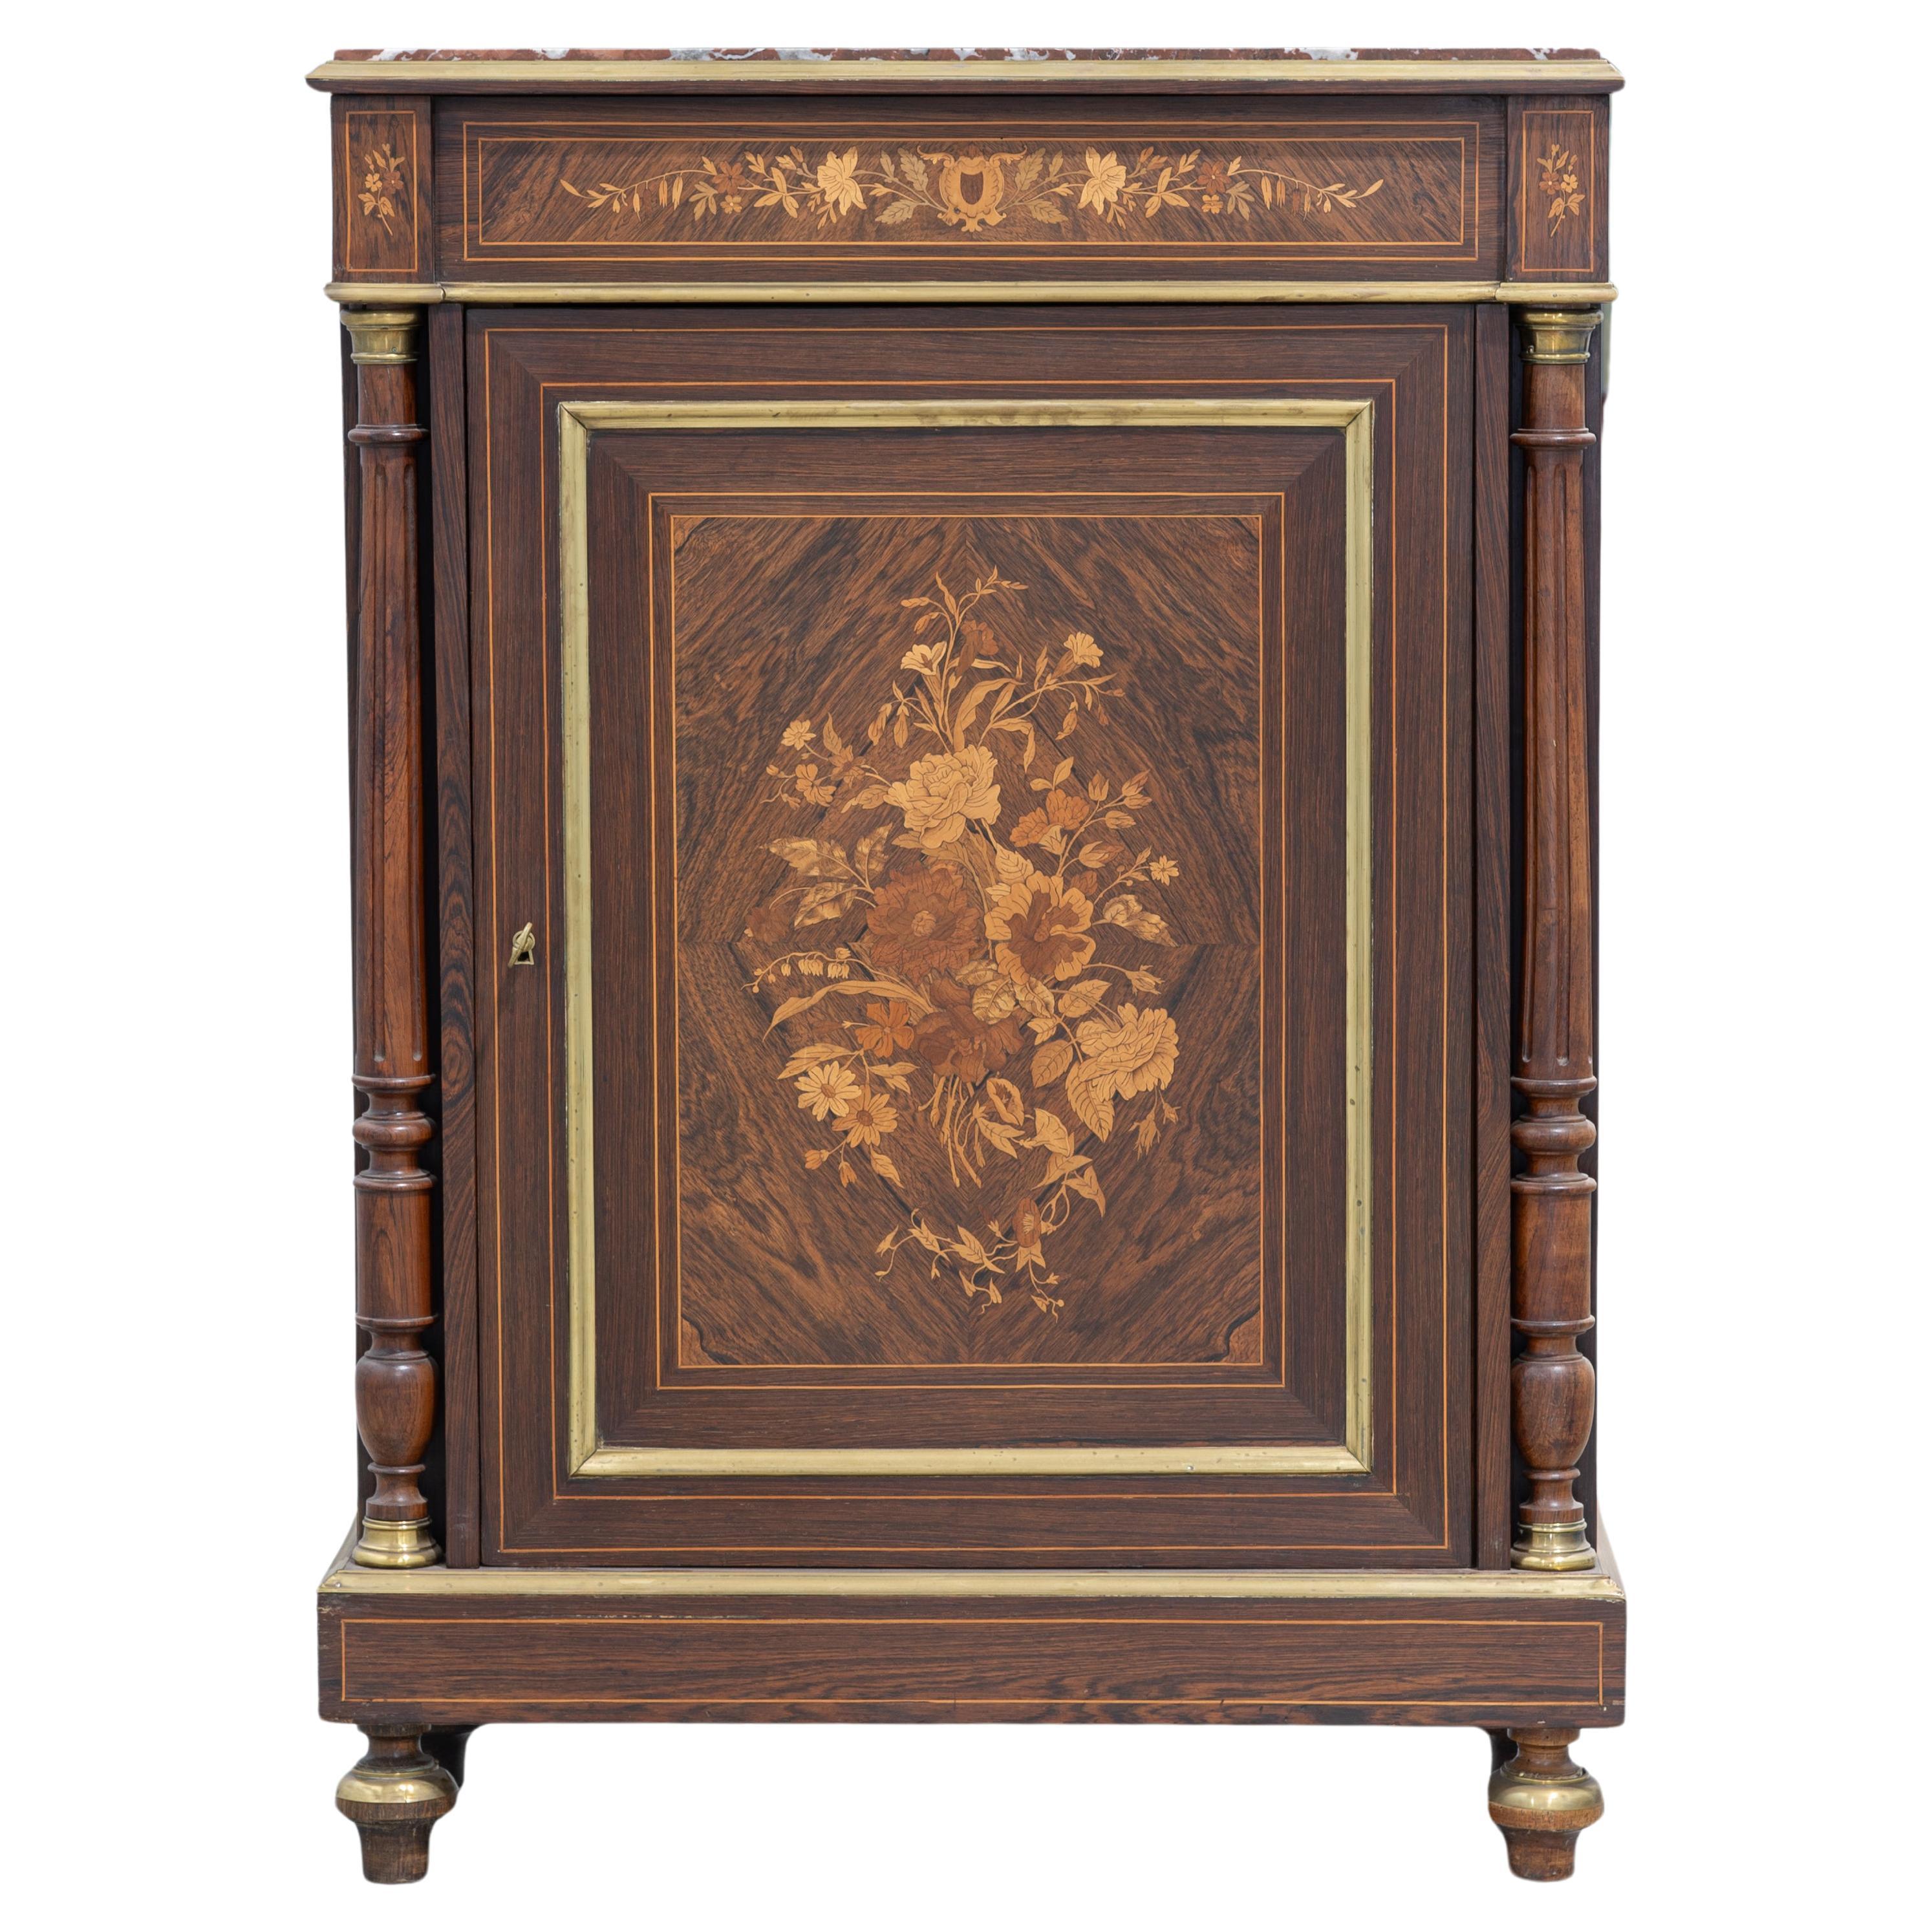  19th Century French Napoleon III "Entre Deux" Cabinet